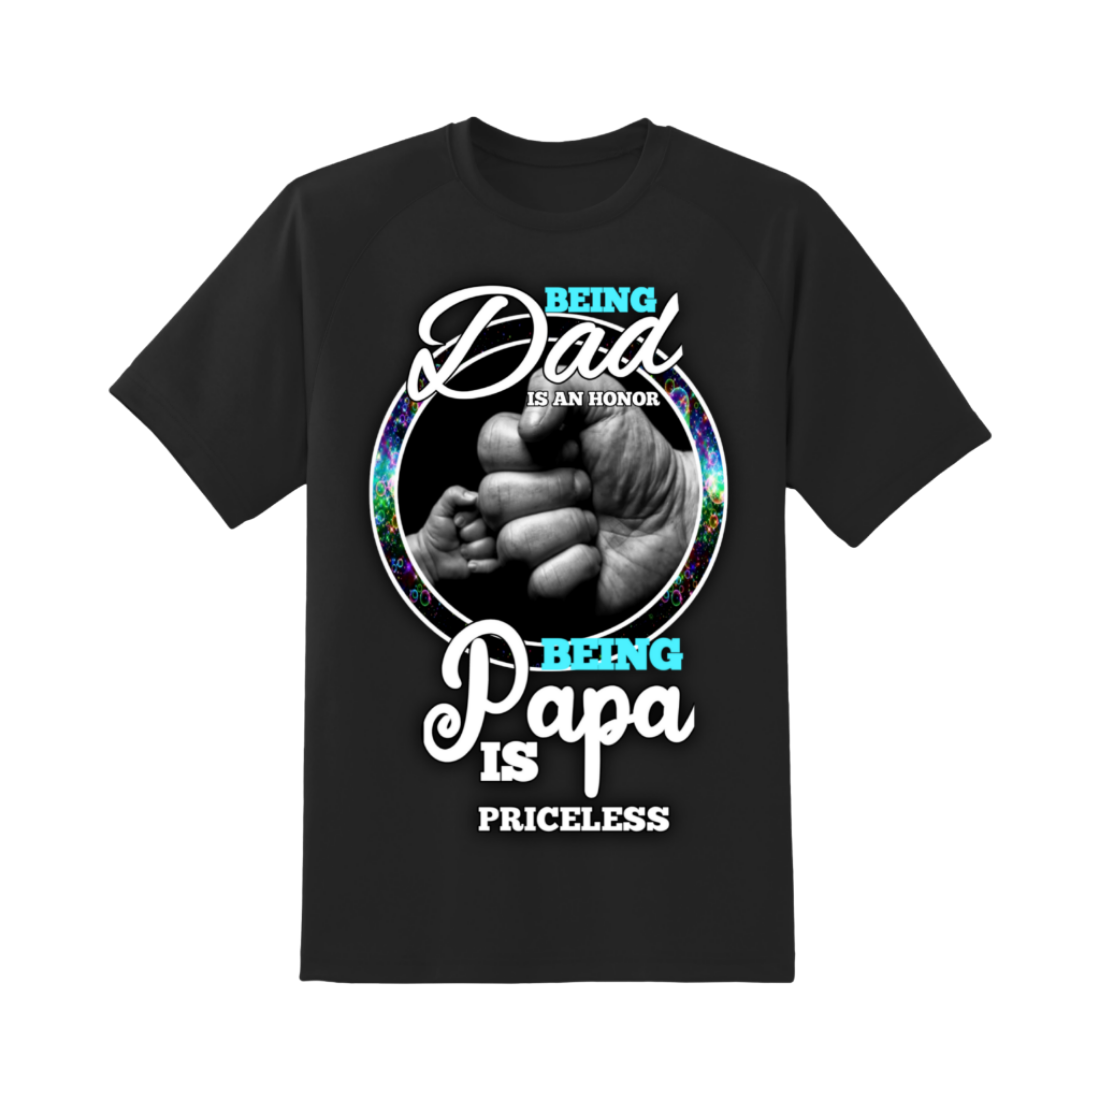 Father's Day Special T-shirt Design Template cover image.